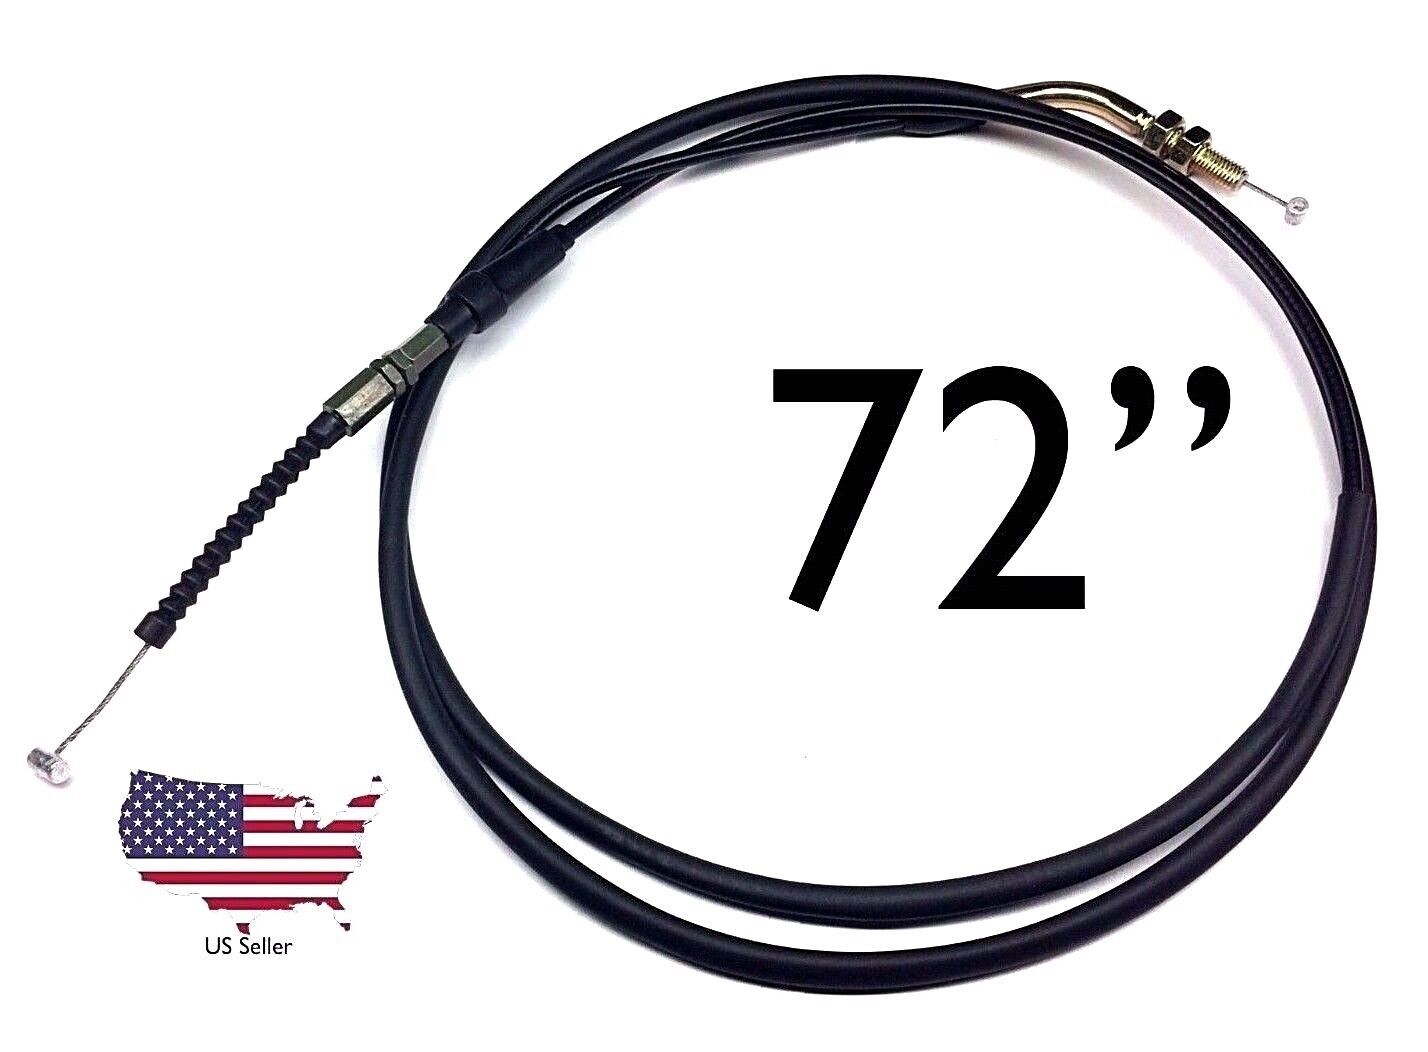 75" Throttle Cable Universal Motorcycles Mopeds ATV Dune Buggy 72" Mount